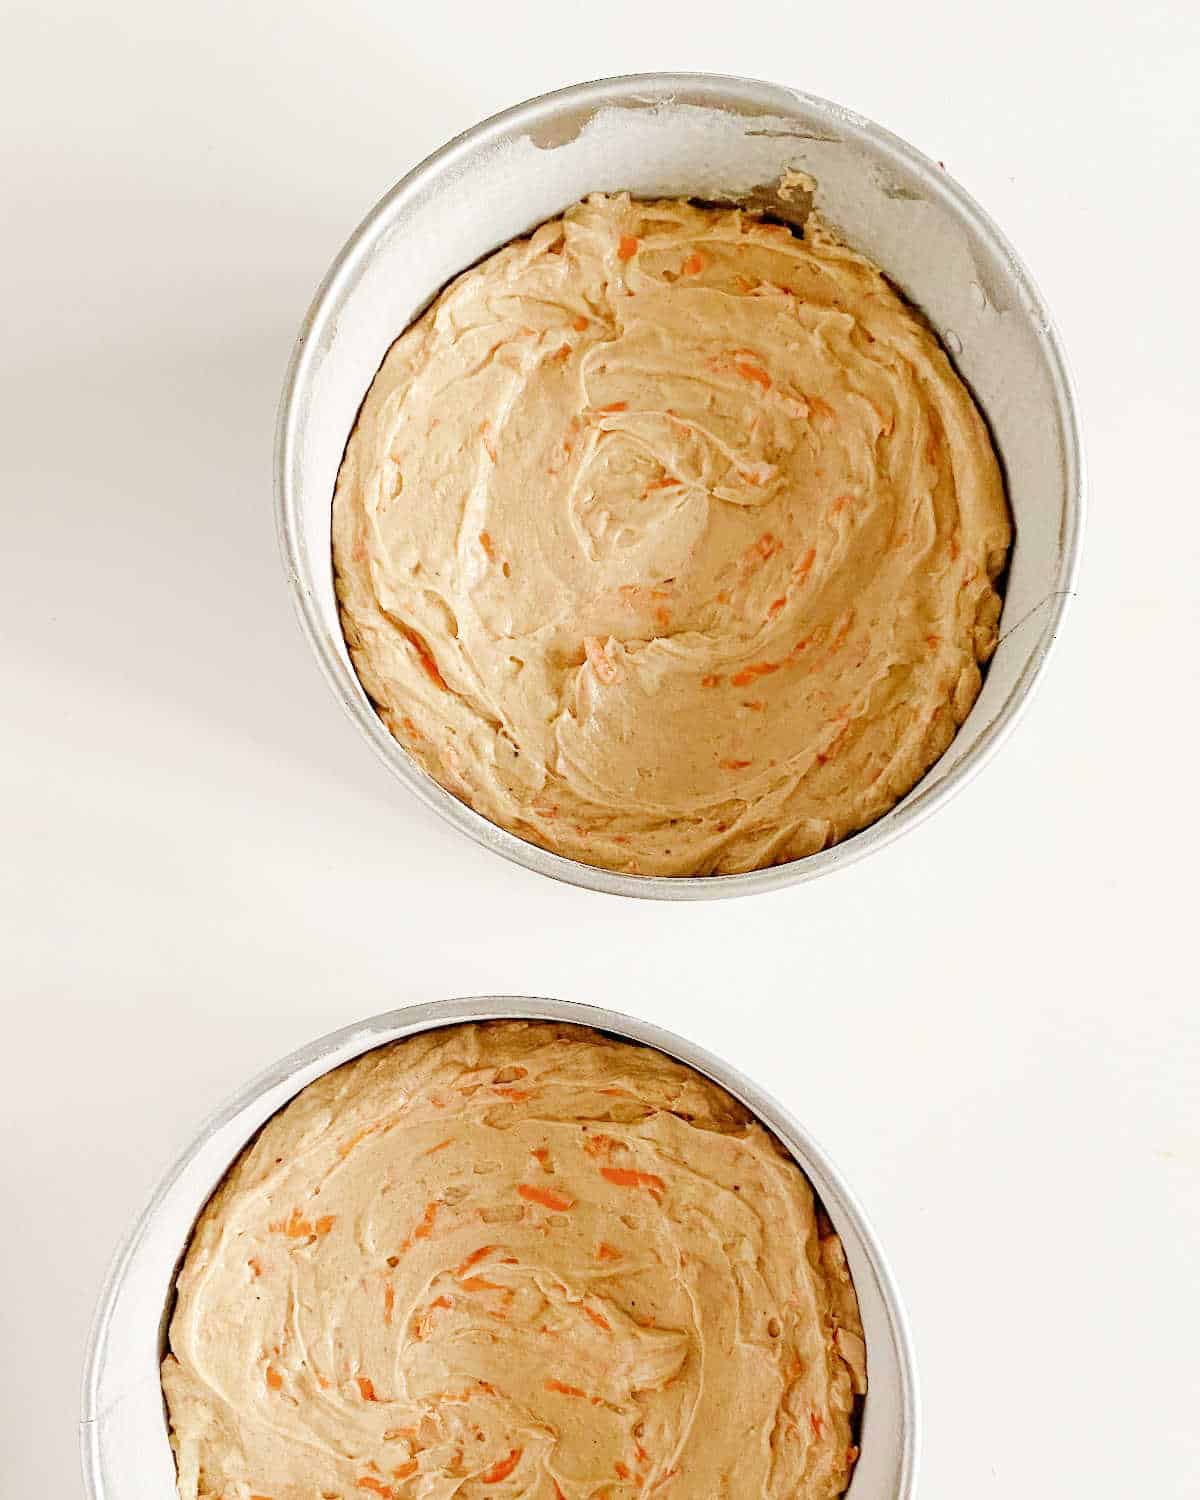 Unbaked carrot cake batter in round cake pans on a white surface.